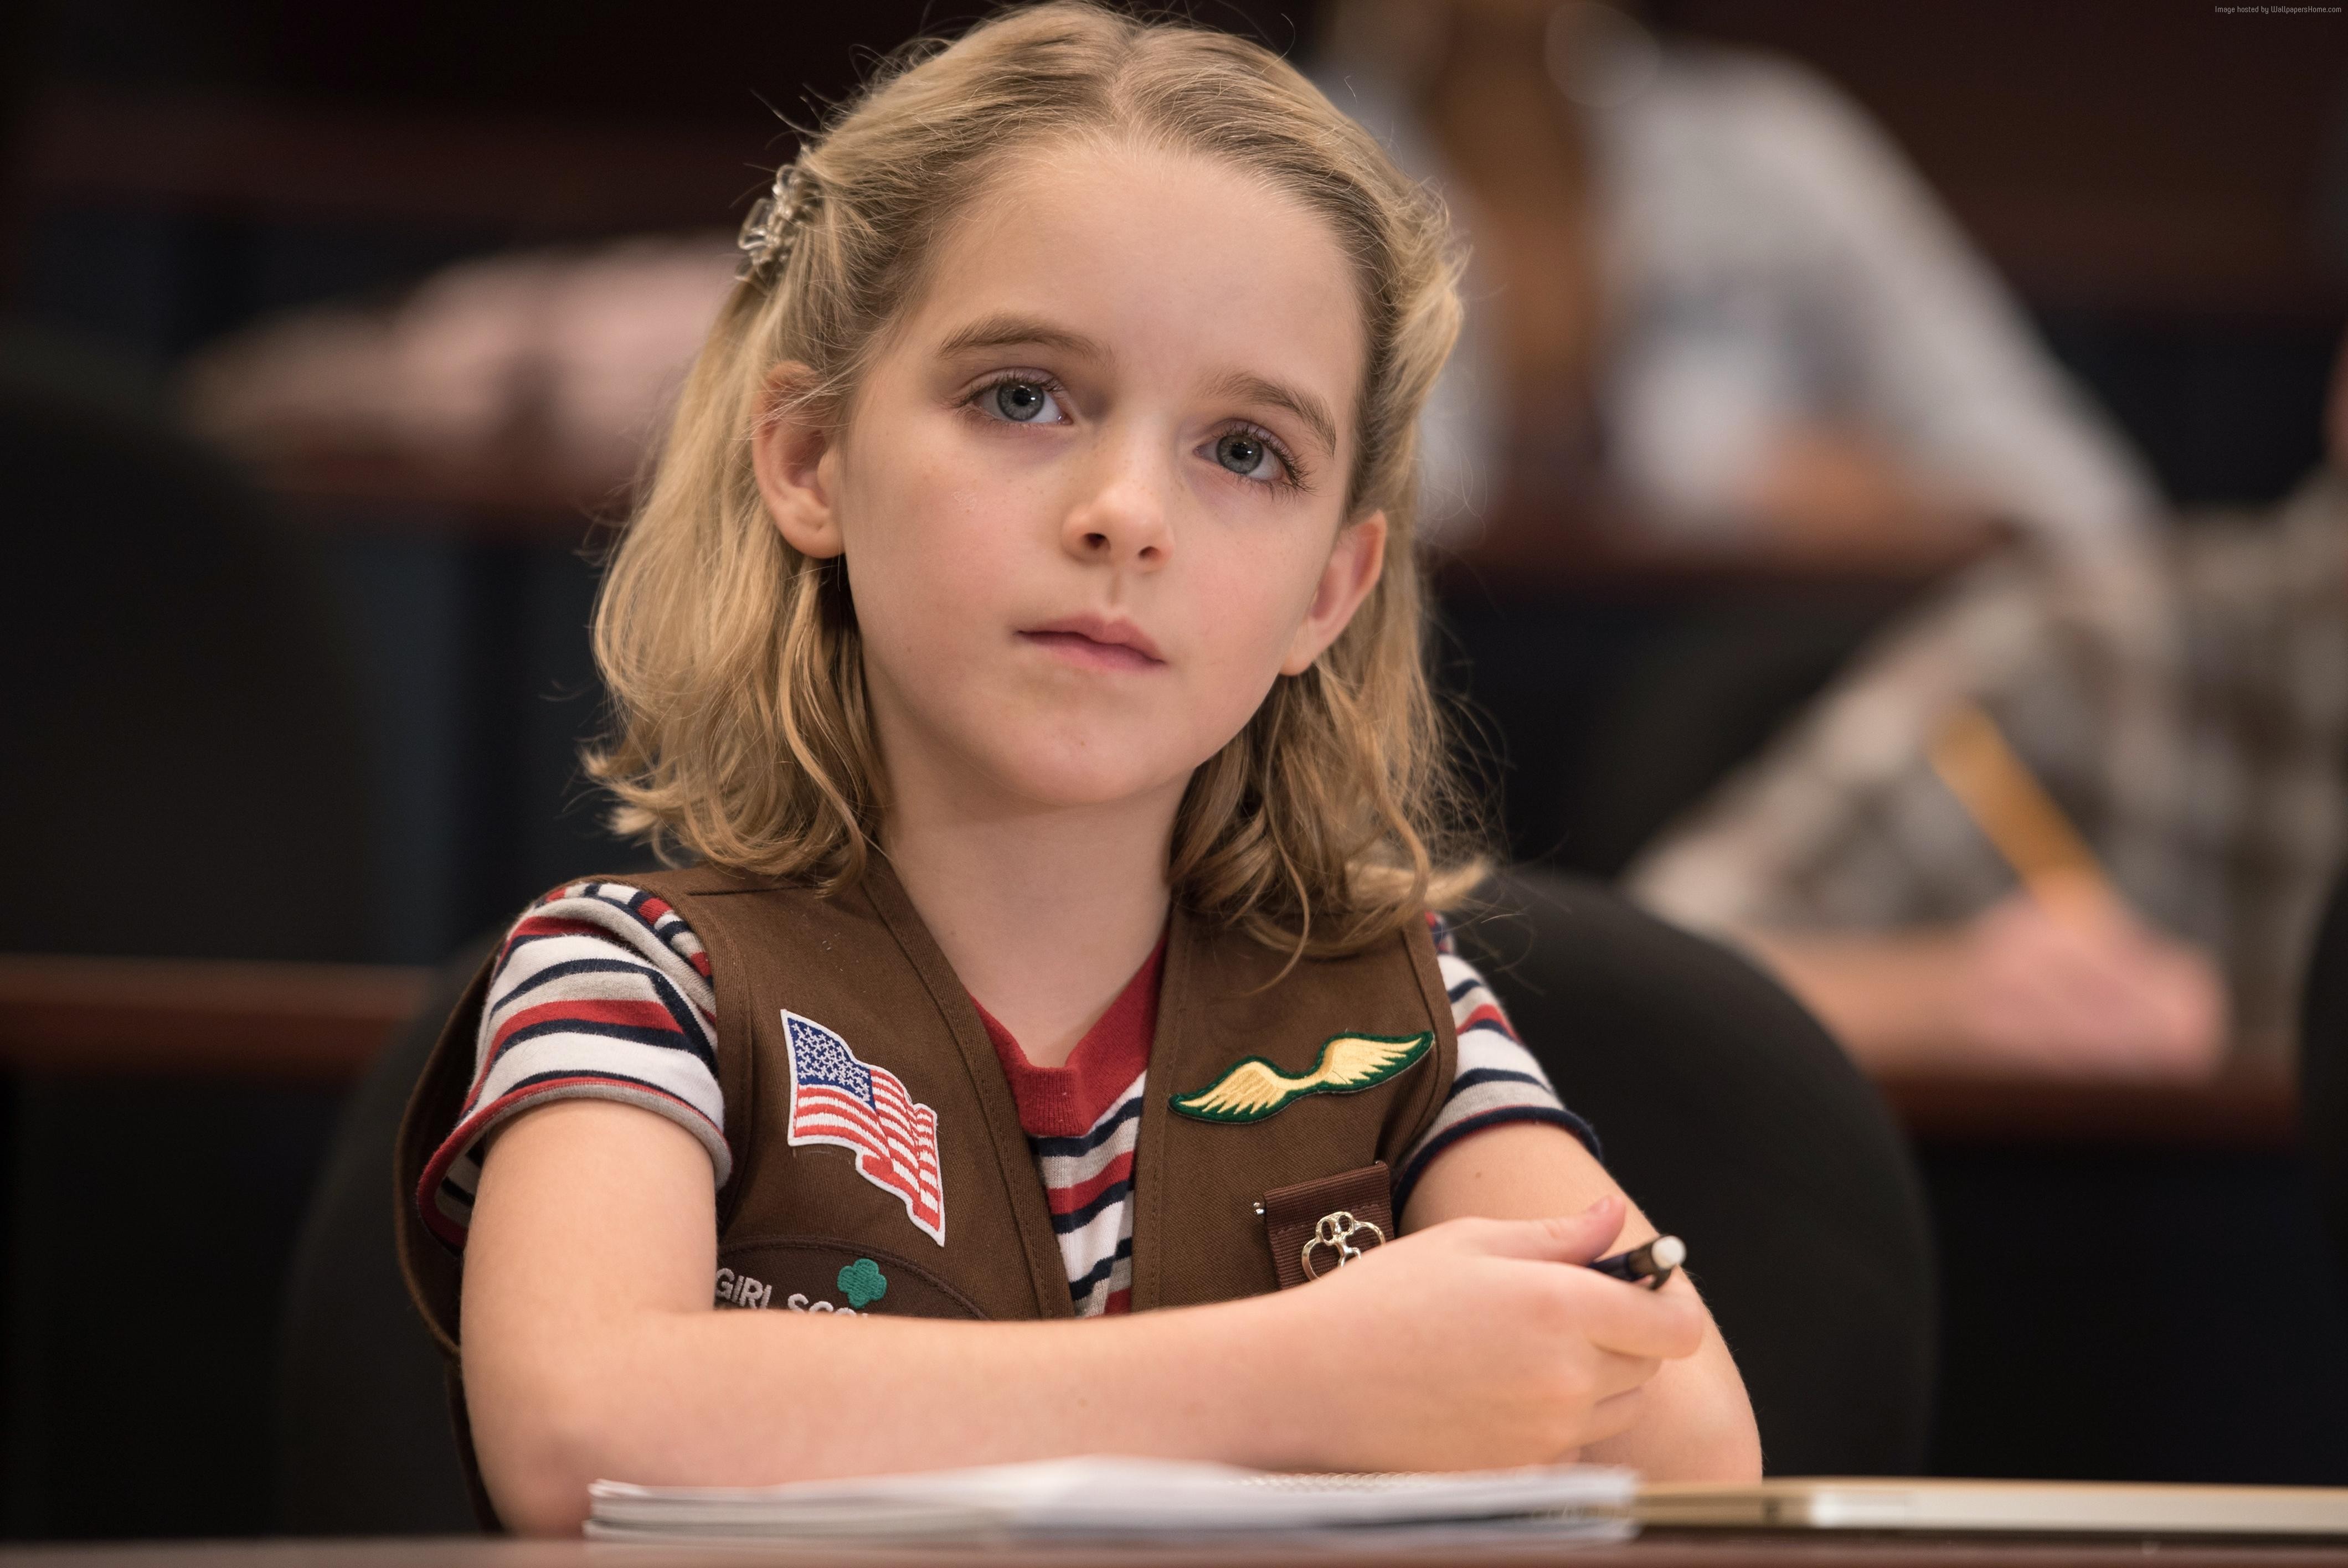 Mckenna Grace from movie Gifted (2017)